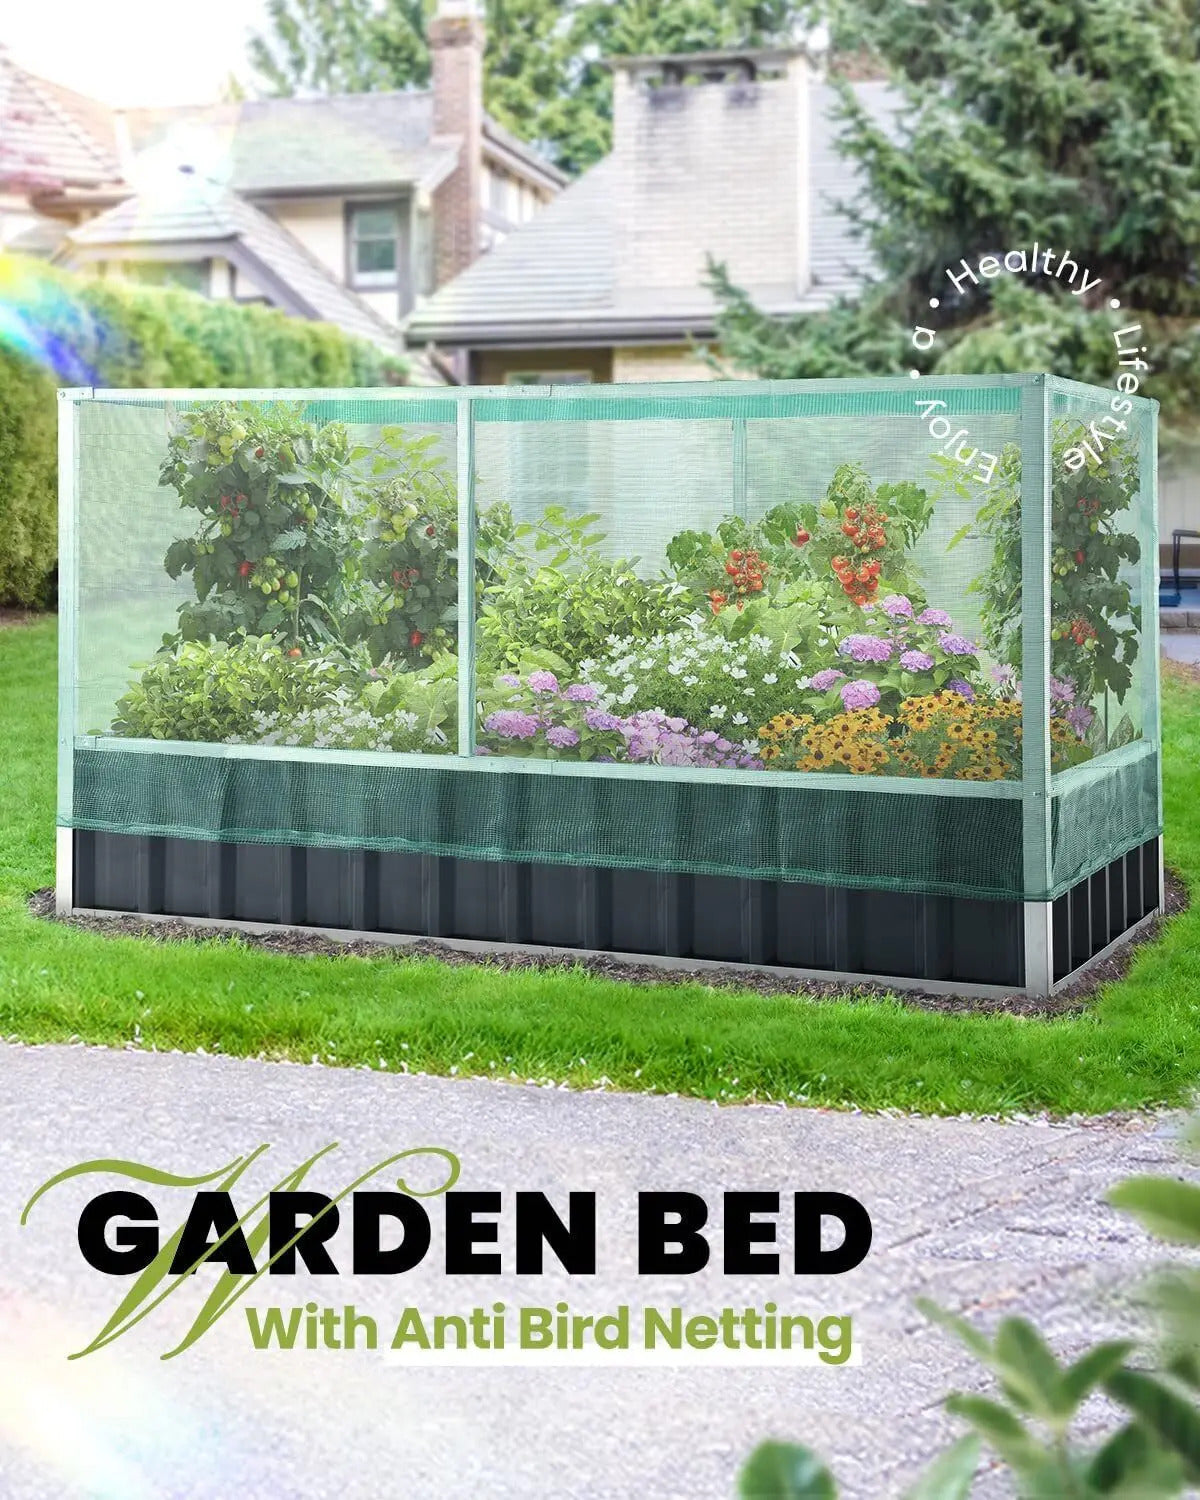 ELEVATED GARDEN BED WITH COVER